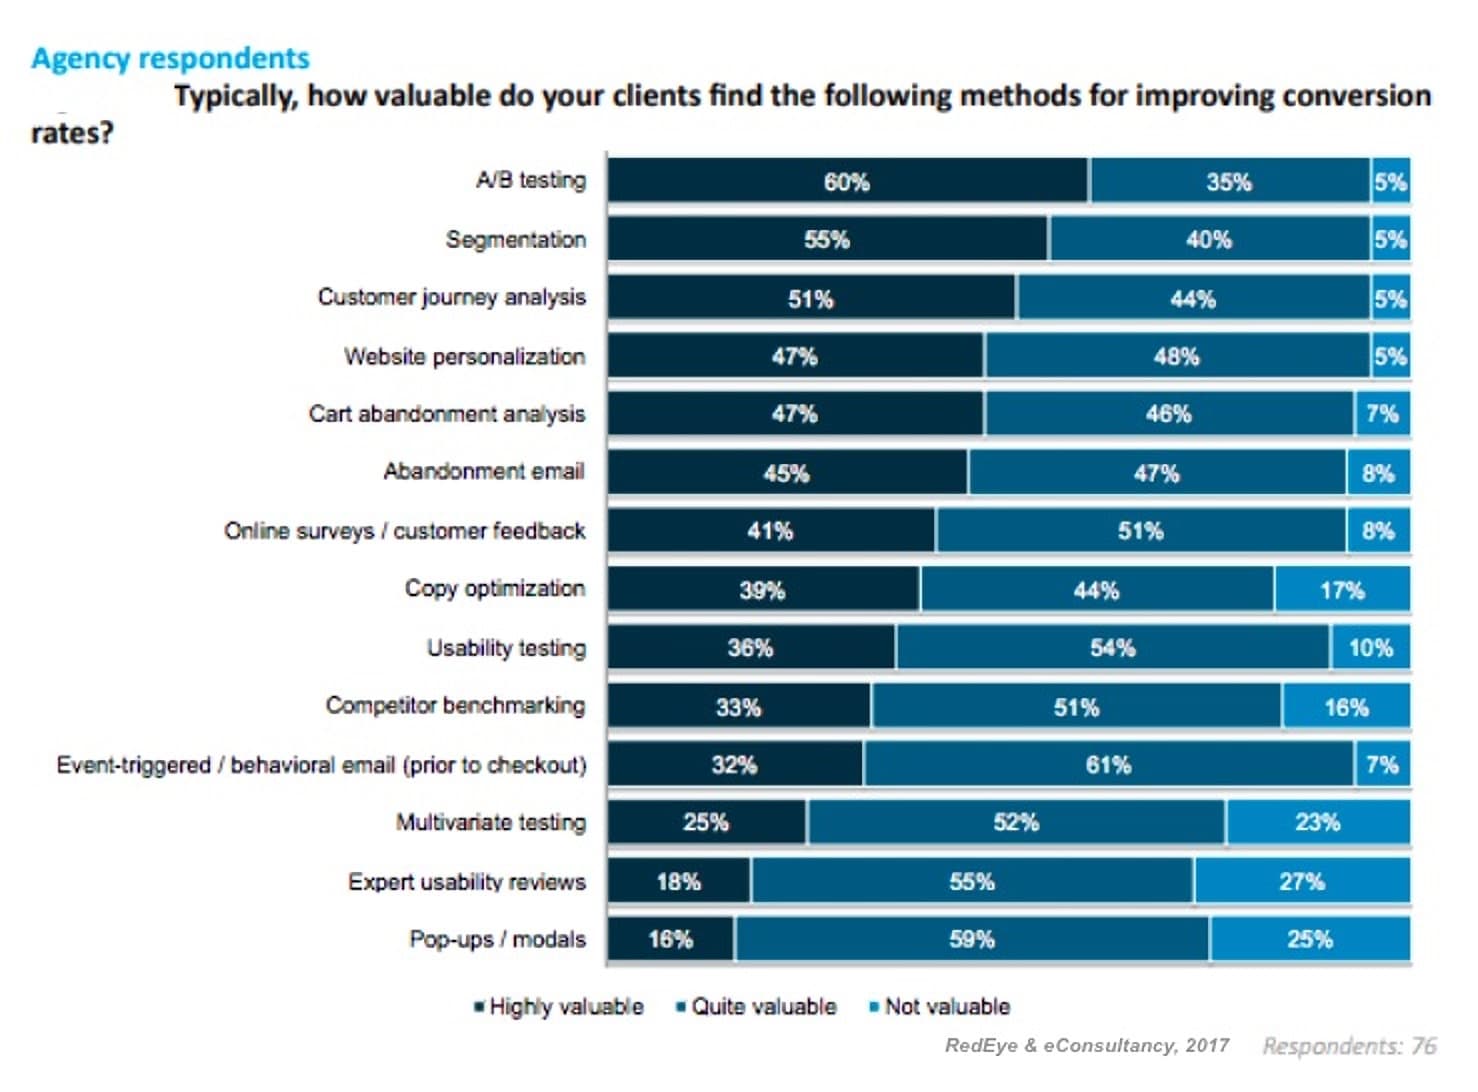 Most "highly valued" methods for improving conversion rates